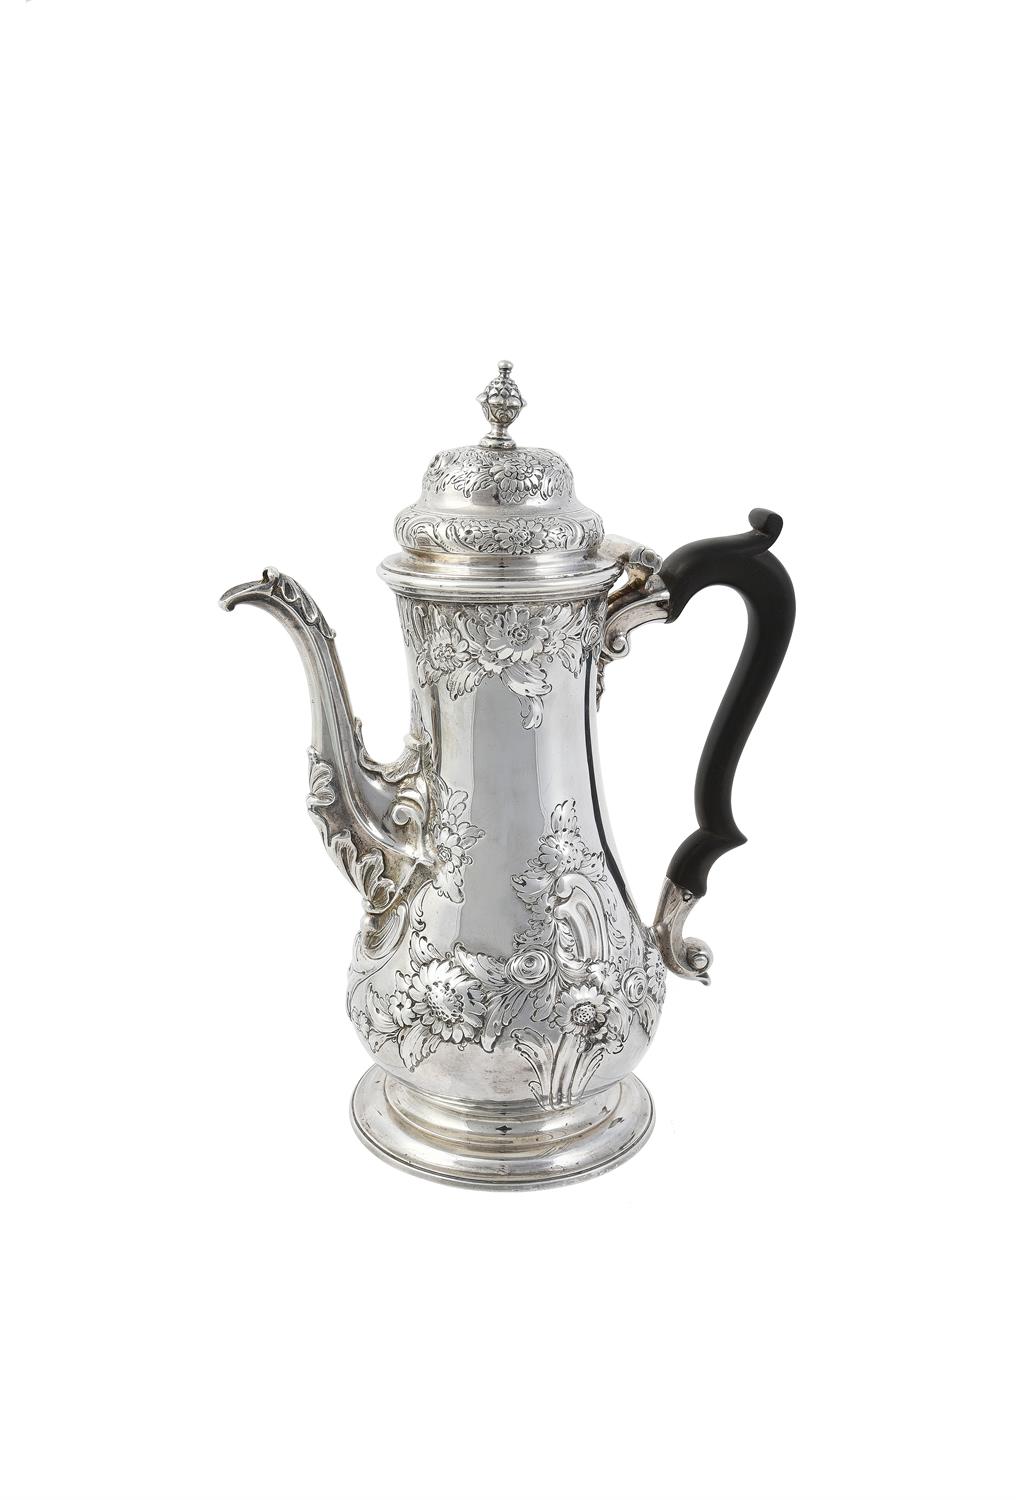 A late George II silver baluster coffee pot by Thomas Whipham